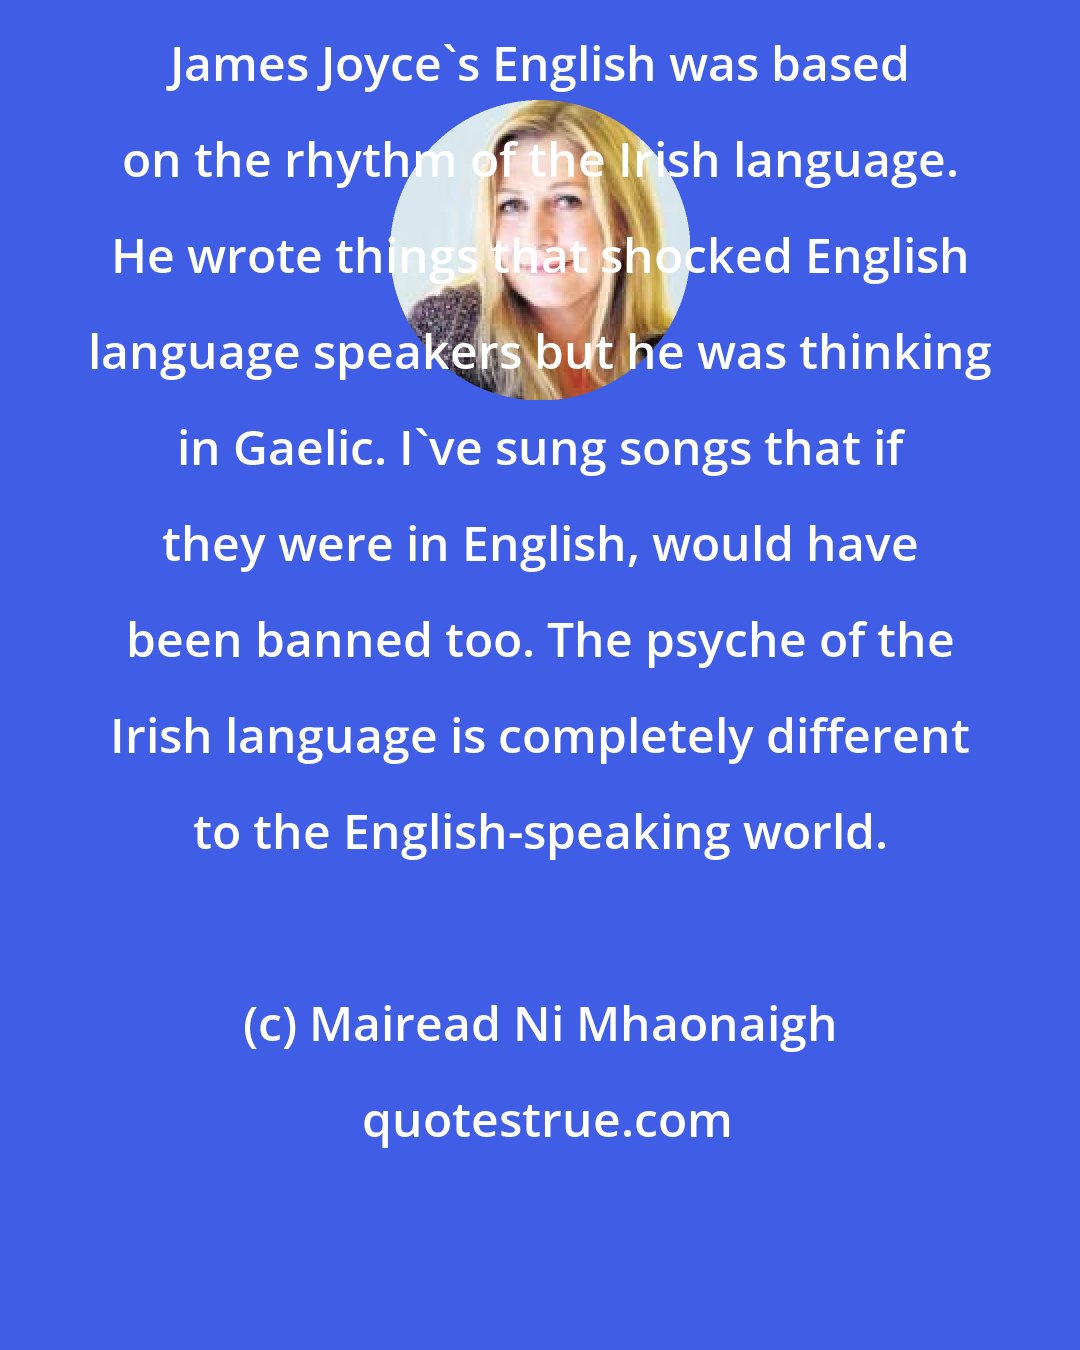 Mairead Ni Mhaonaigh: James Joyce's English was based on the rhythm of the Irish language. He wrote things that shocked English language speakers but he was thinking in Gaelic. I've sung songs that if they were in English, would have been banned too. The psyche of the Irish language is completely different to the English-speaking world.